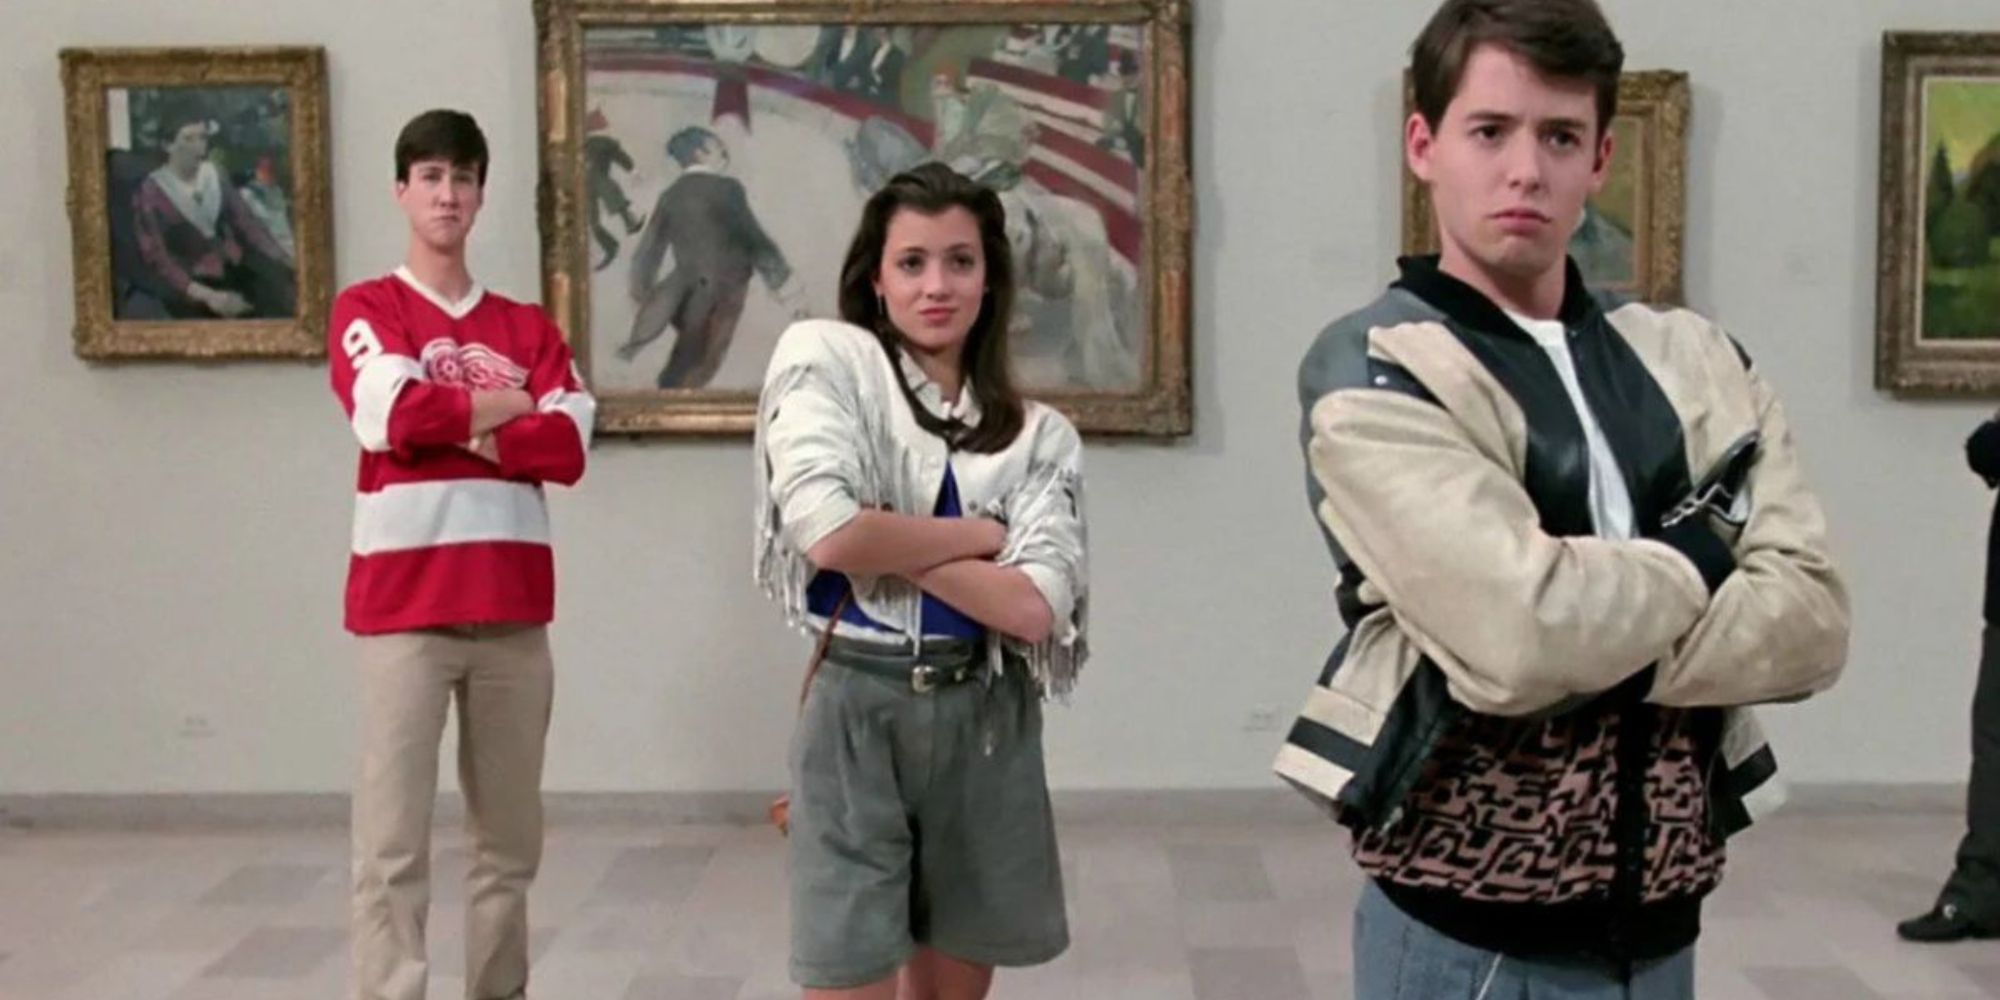 Ferris, Sloane, and Cameron in art gallery